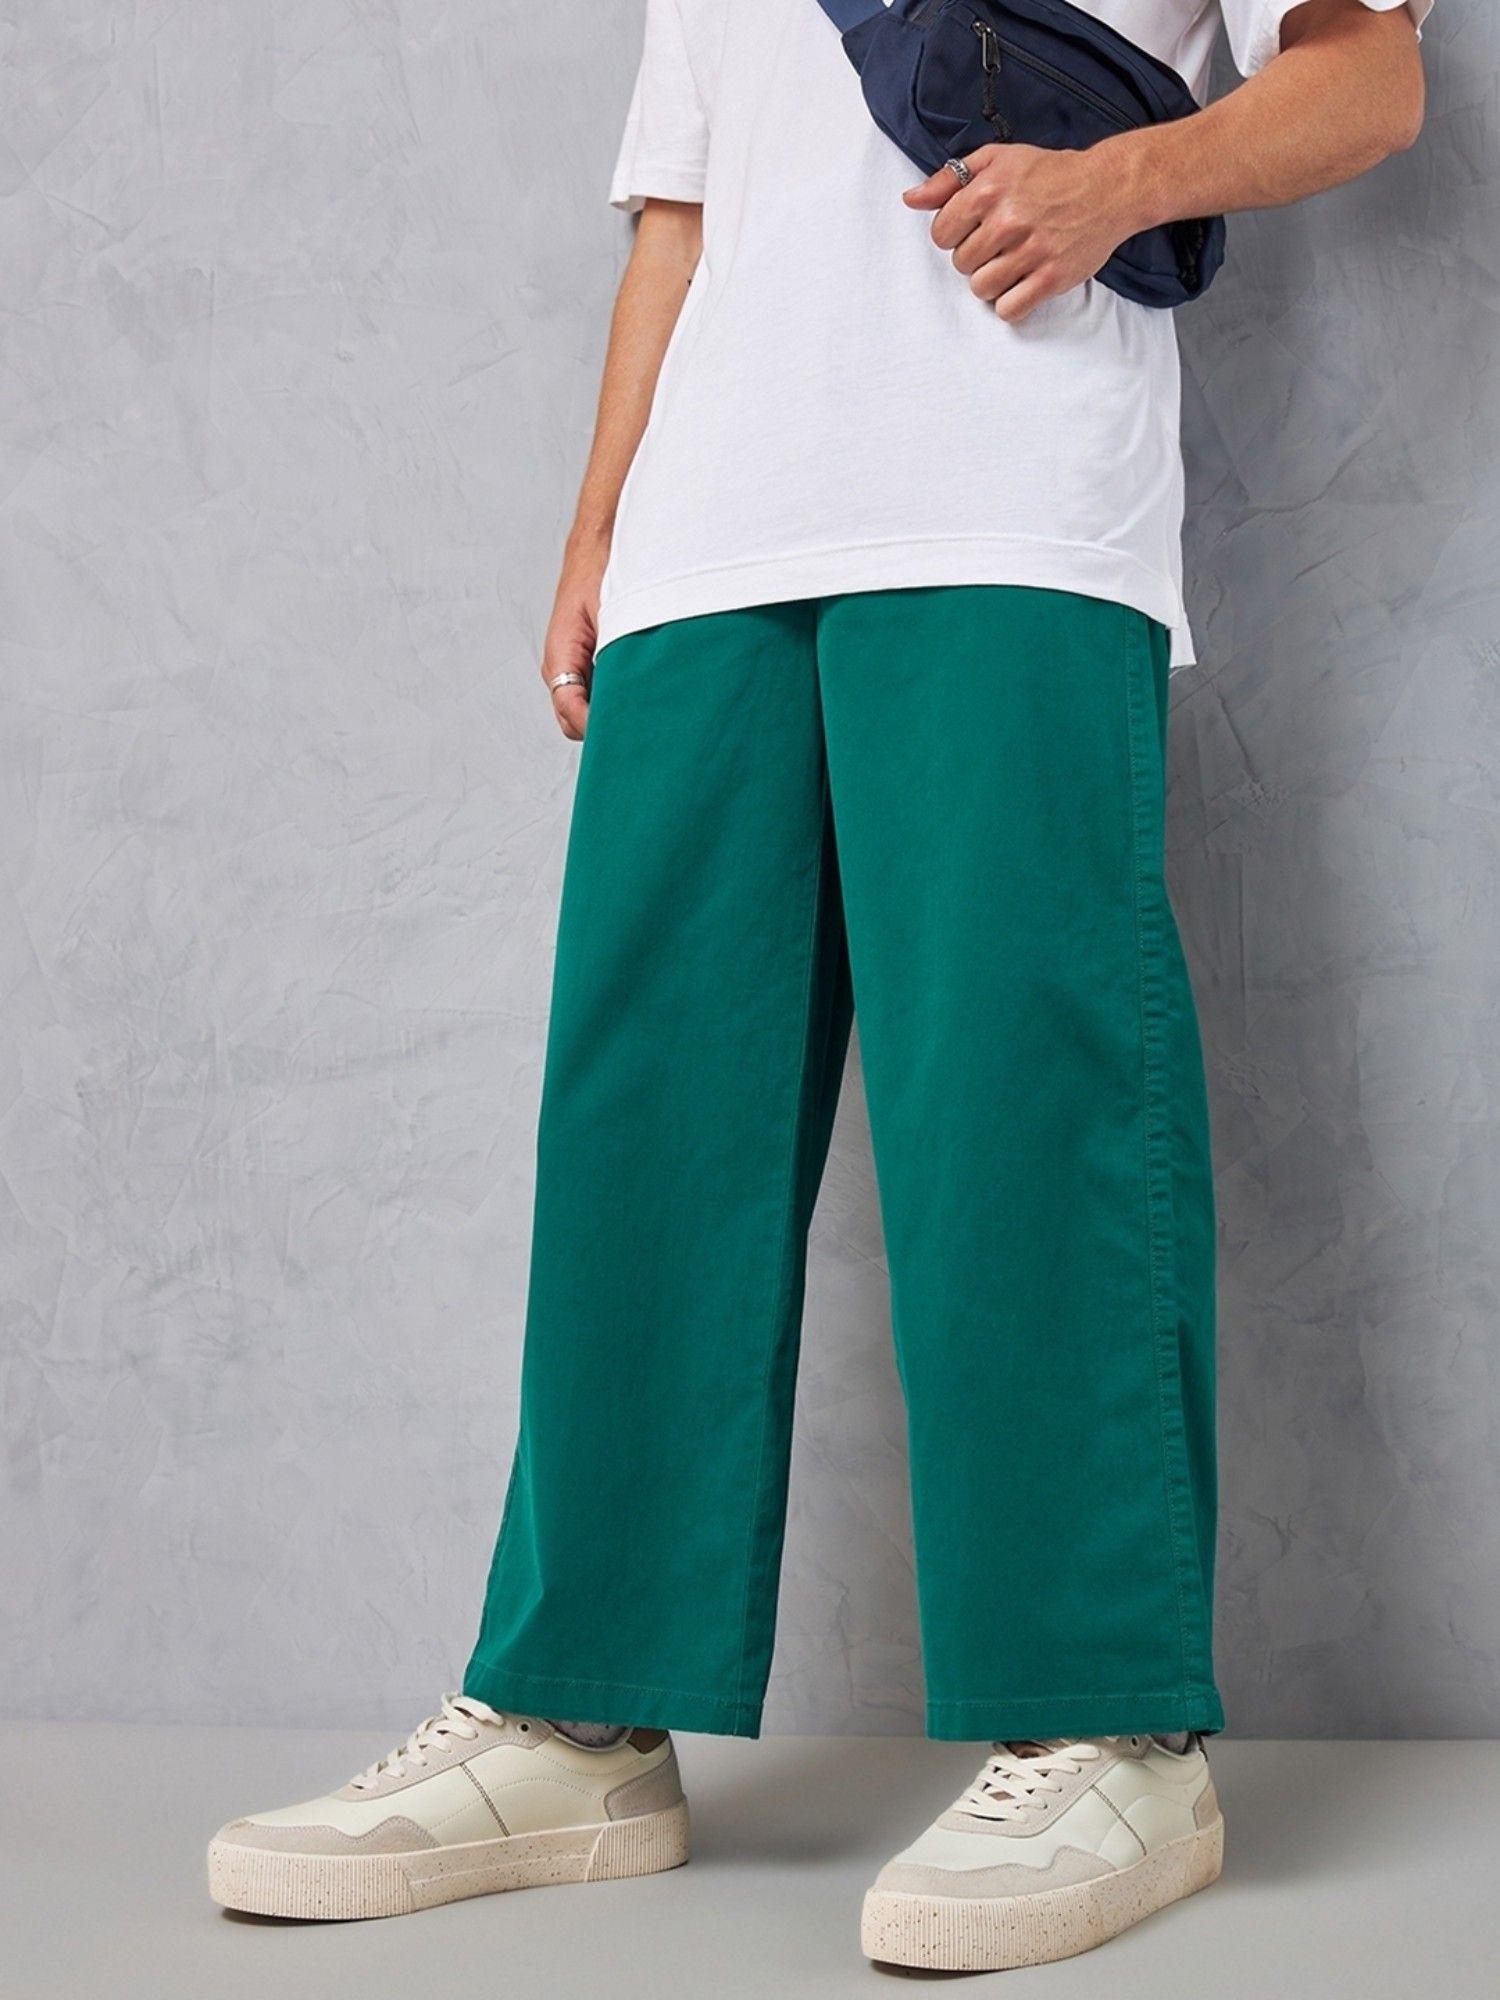 mens green oversized casual pants